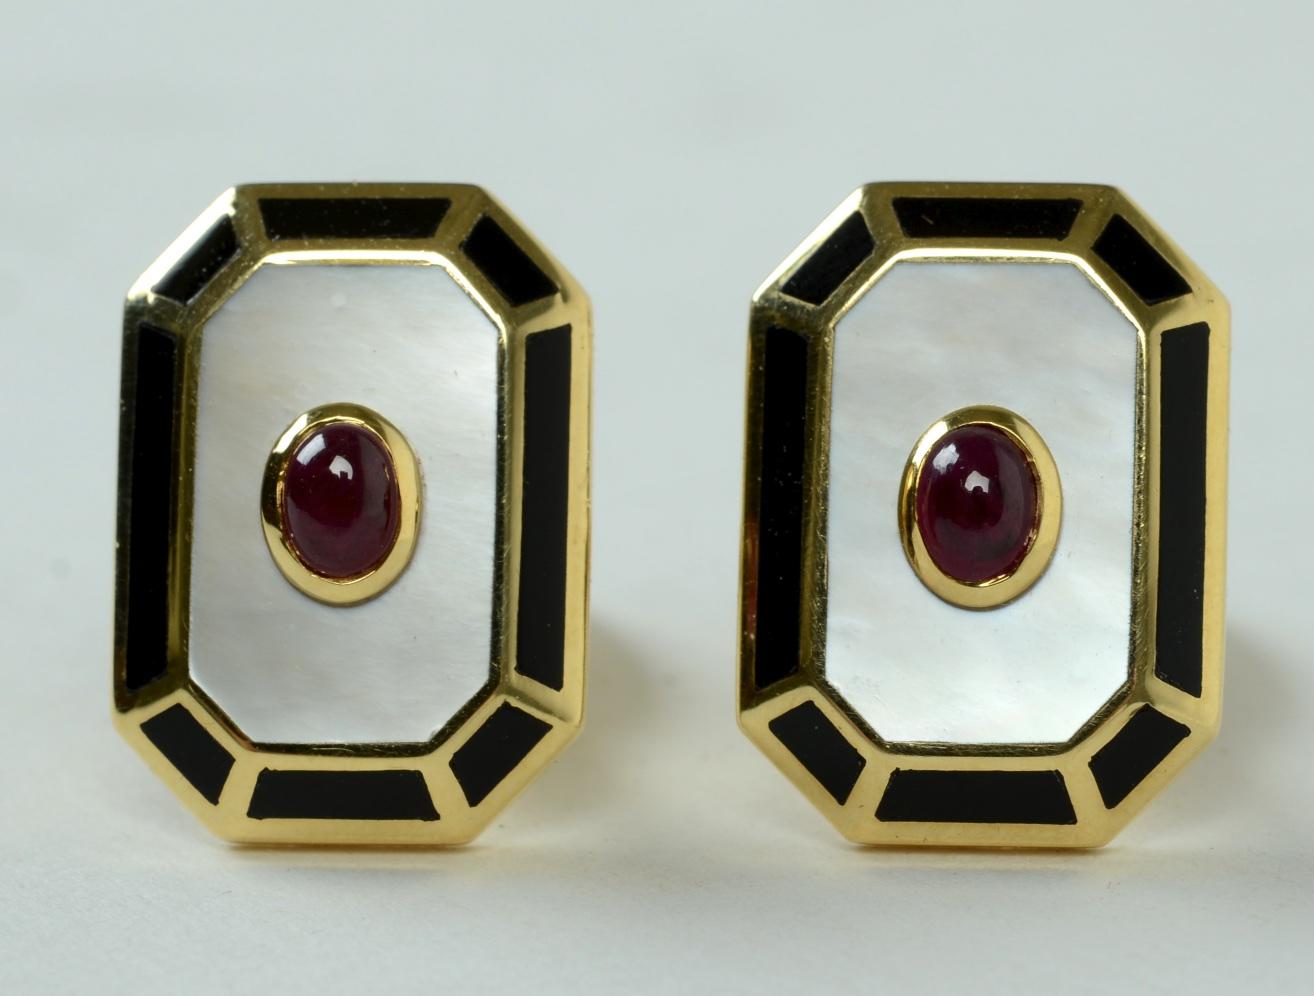 Pair of Art Deco Style, Mother of Pearl, Cabochon Ruby, and Black Onyx Cufflinks set in 18KT yellow gold, by Rosa Cellini Gioielli. The oval, bezel set cabochon ruby is centered on a mother of pearl convex polygon. The sides have 18KT yellow gold